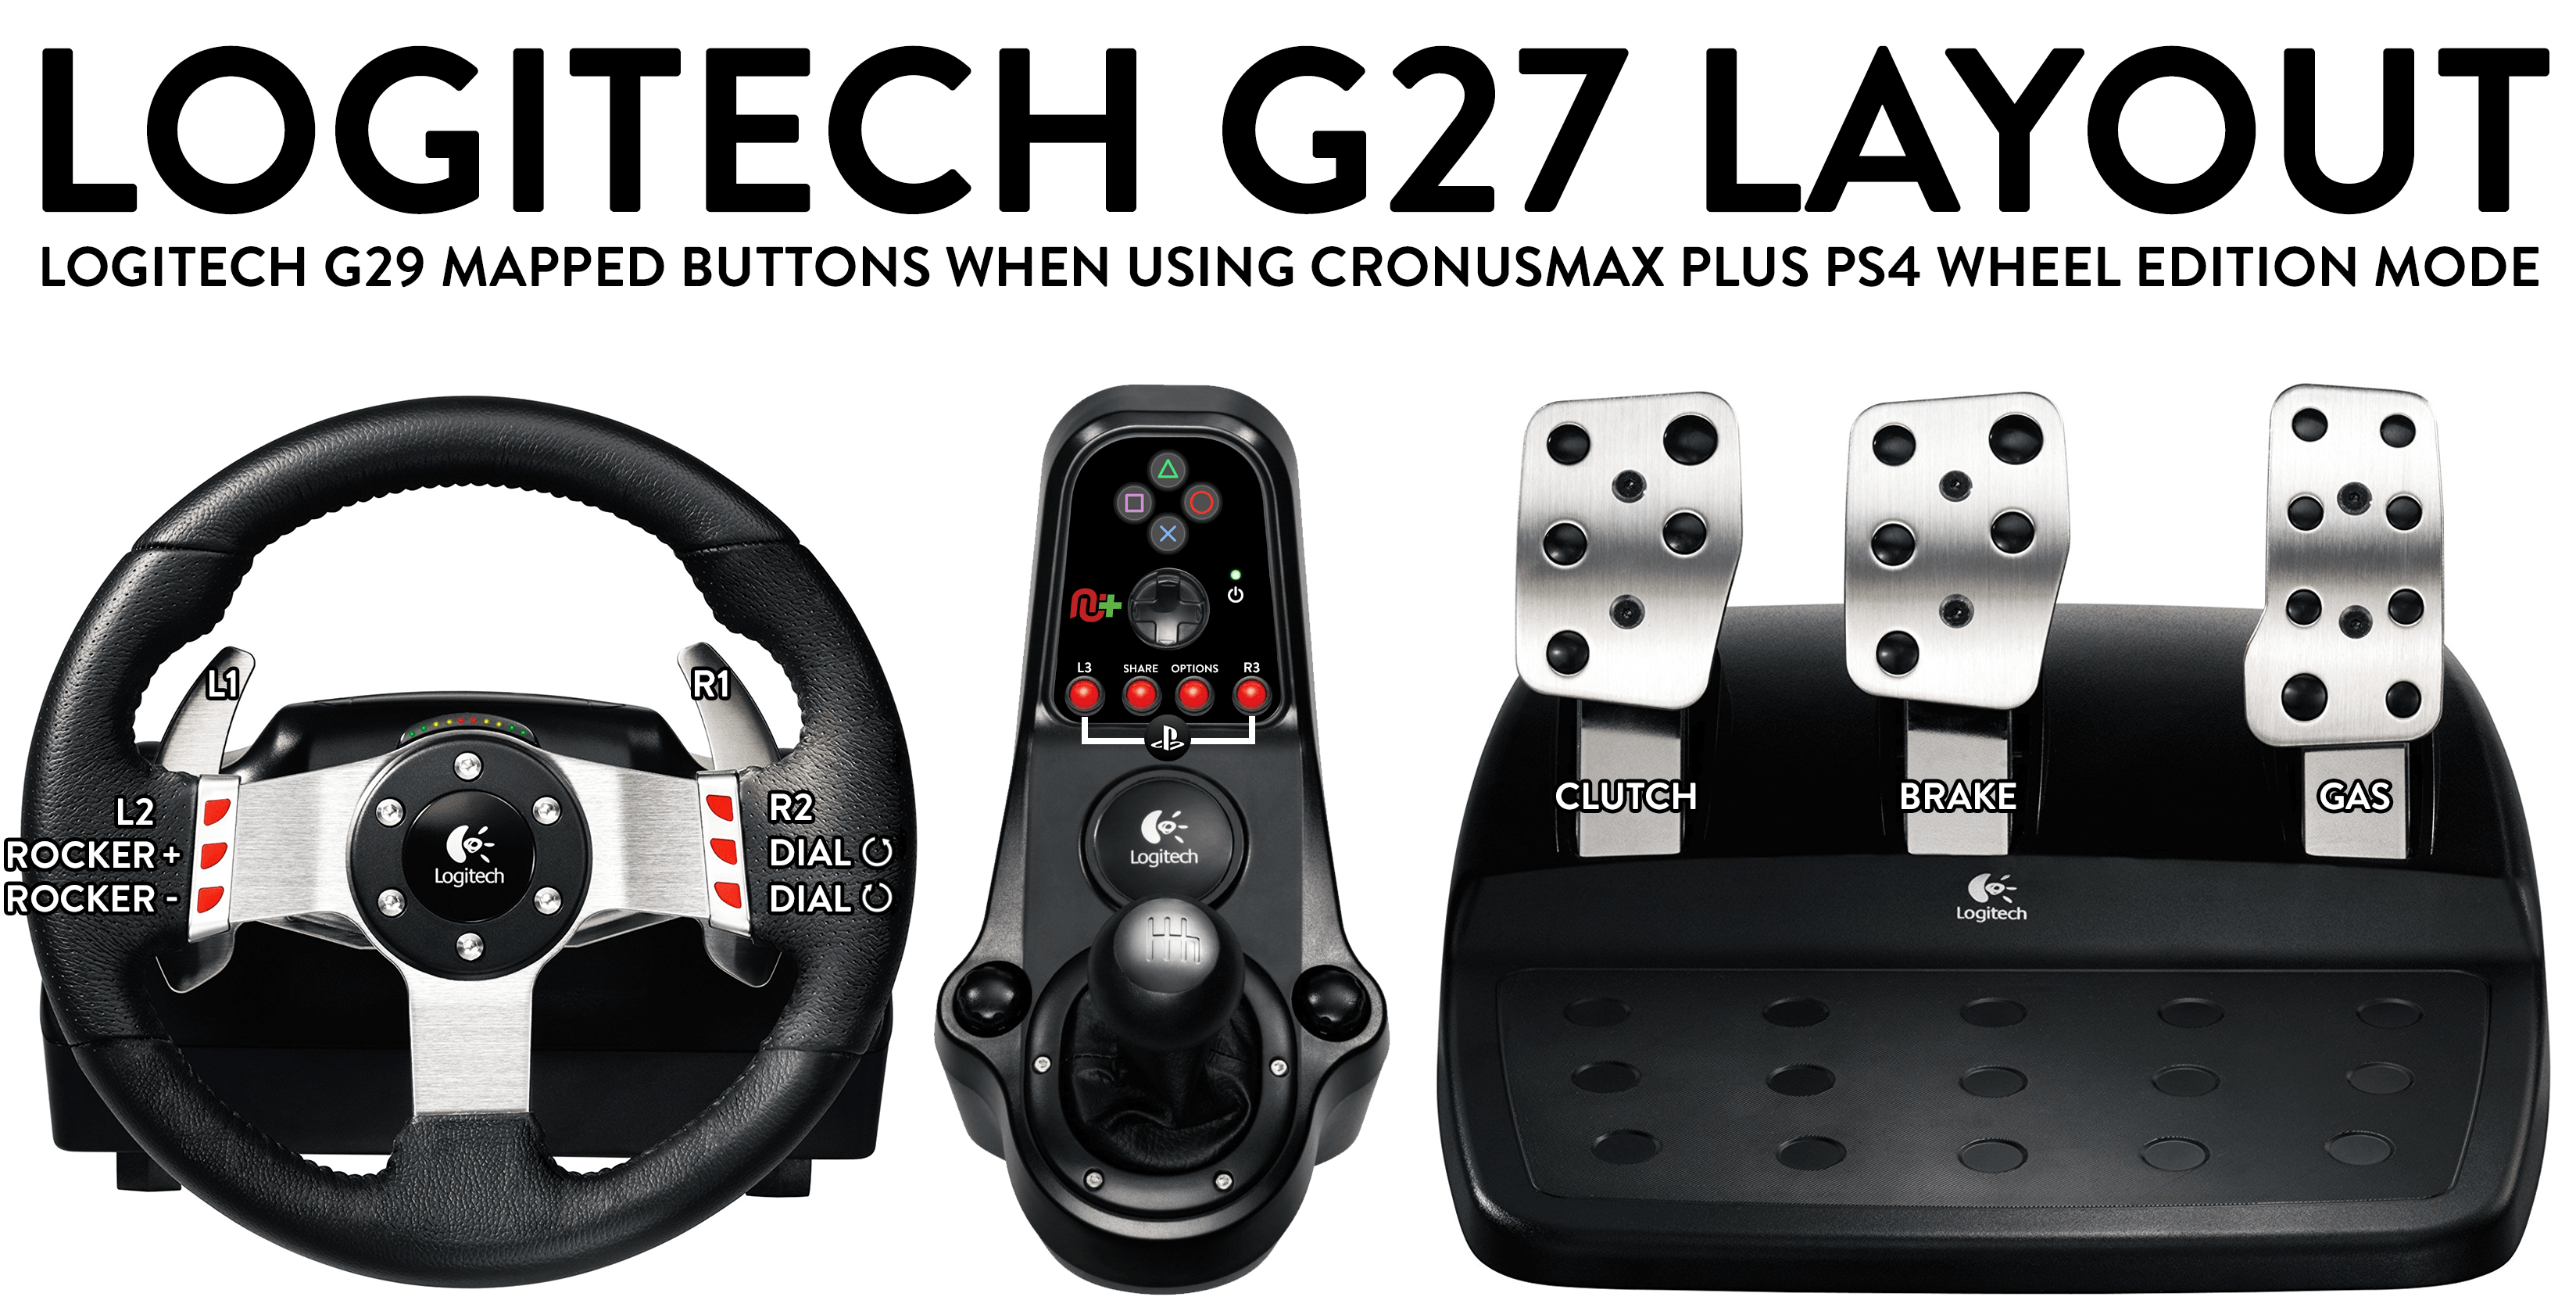 Where there is a will, there is a way, Logitech G27 fully operational on  PS5 thanks to a Cronus Zen (it was by far the cheapest option to play GT7  with a